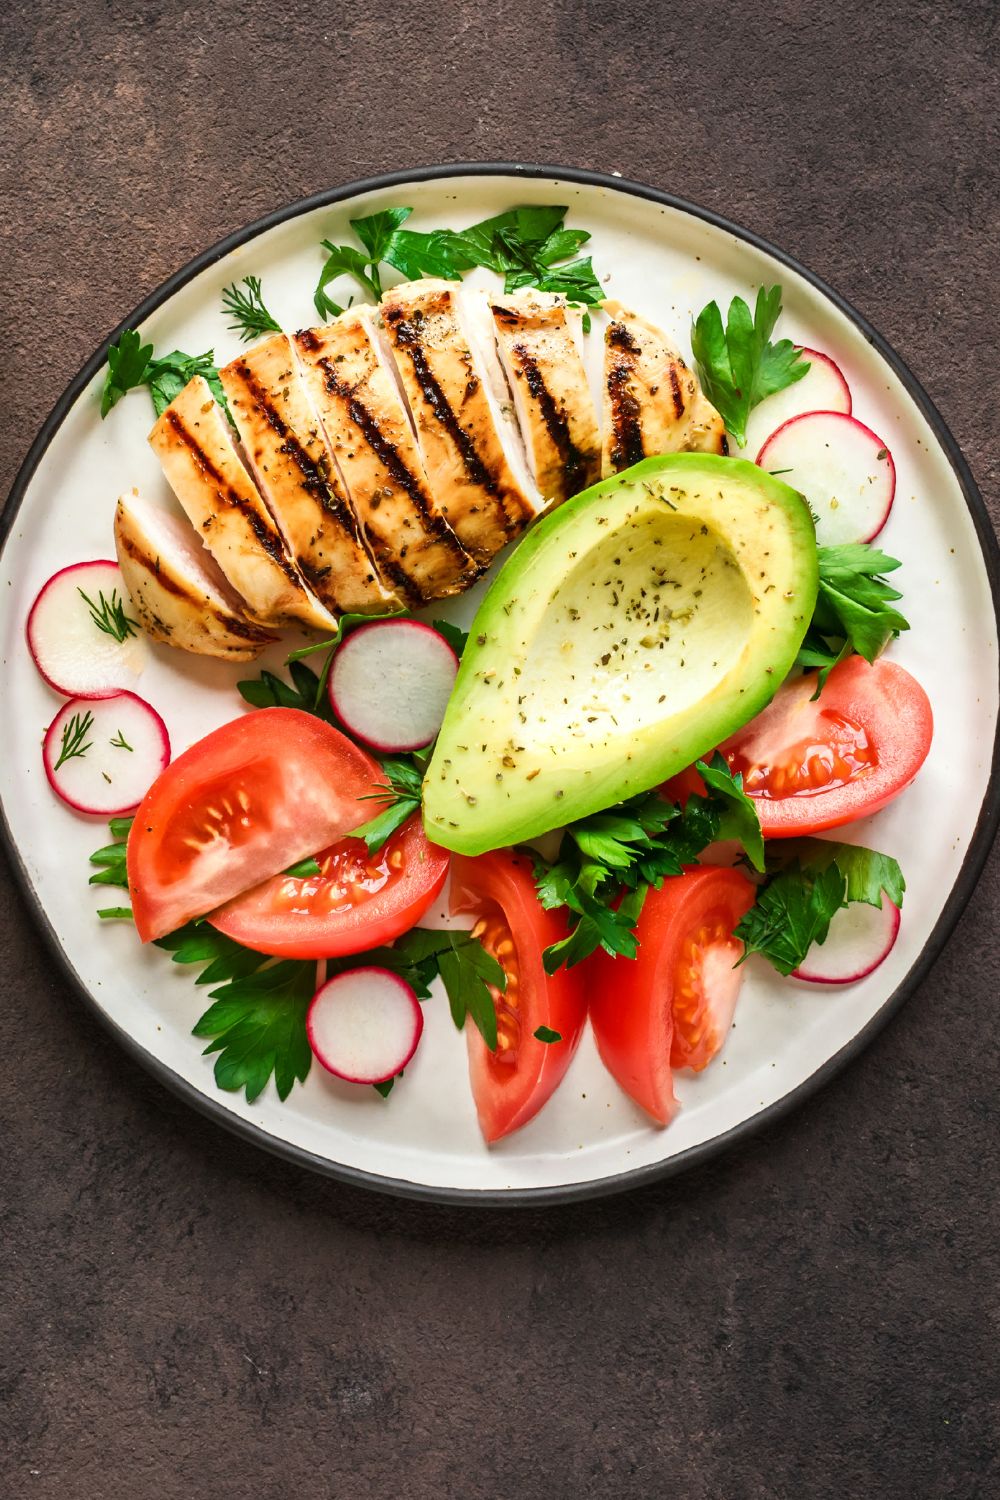 A plate filled with healthy foods such as chicken, avocado, and vegetables